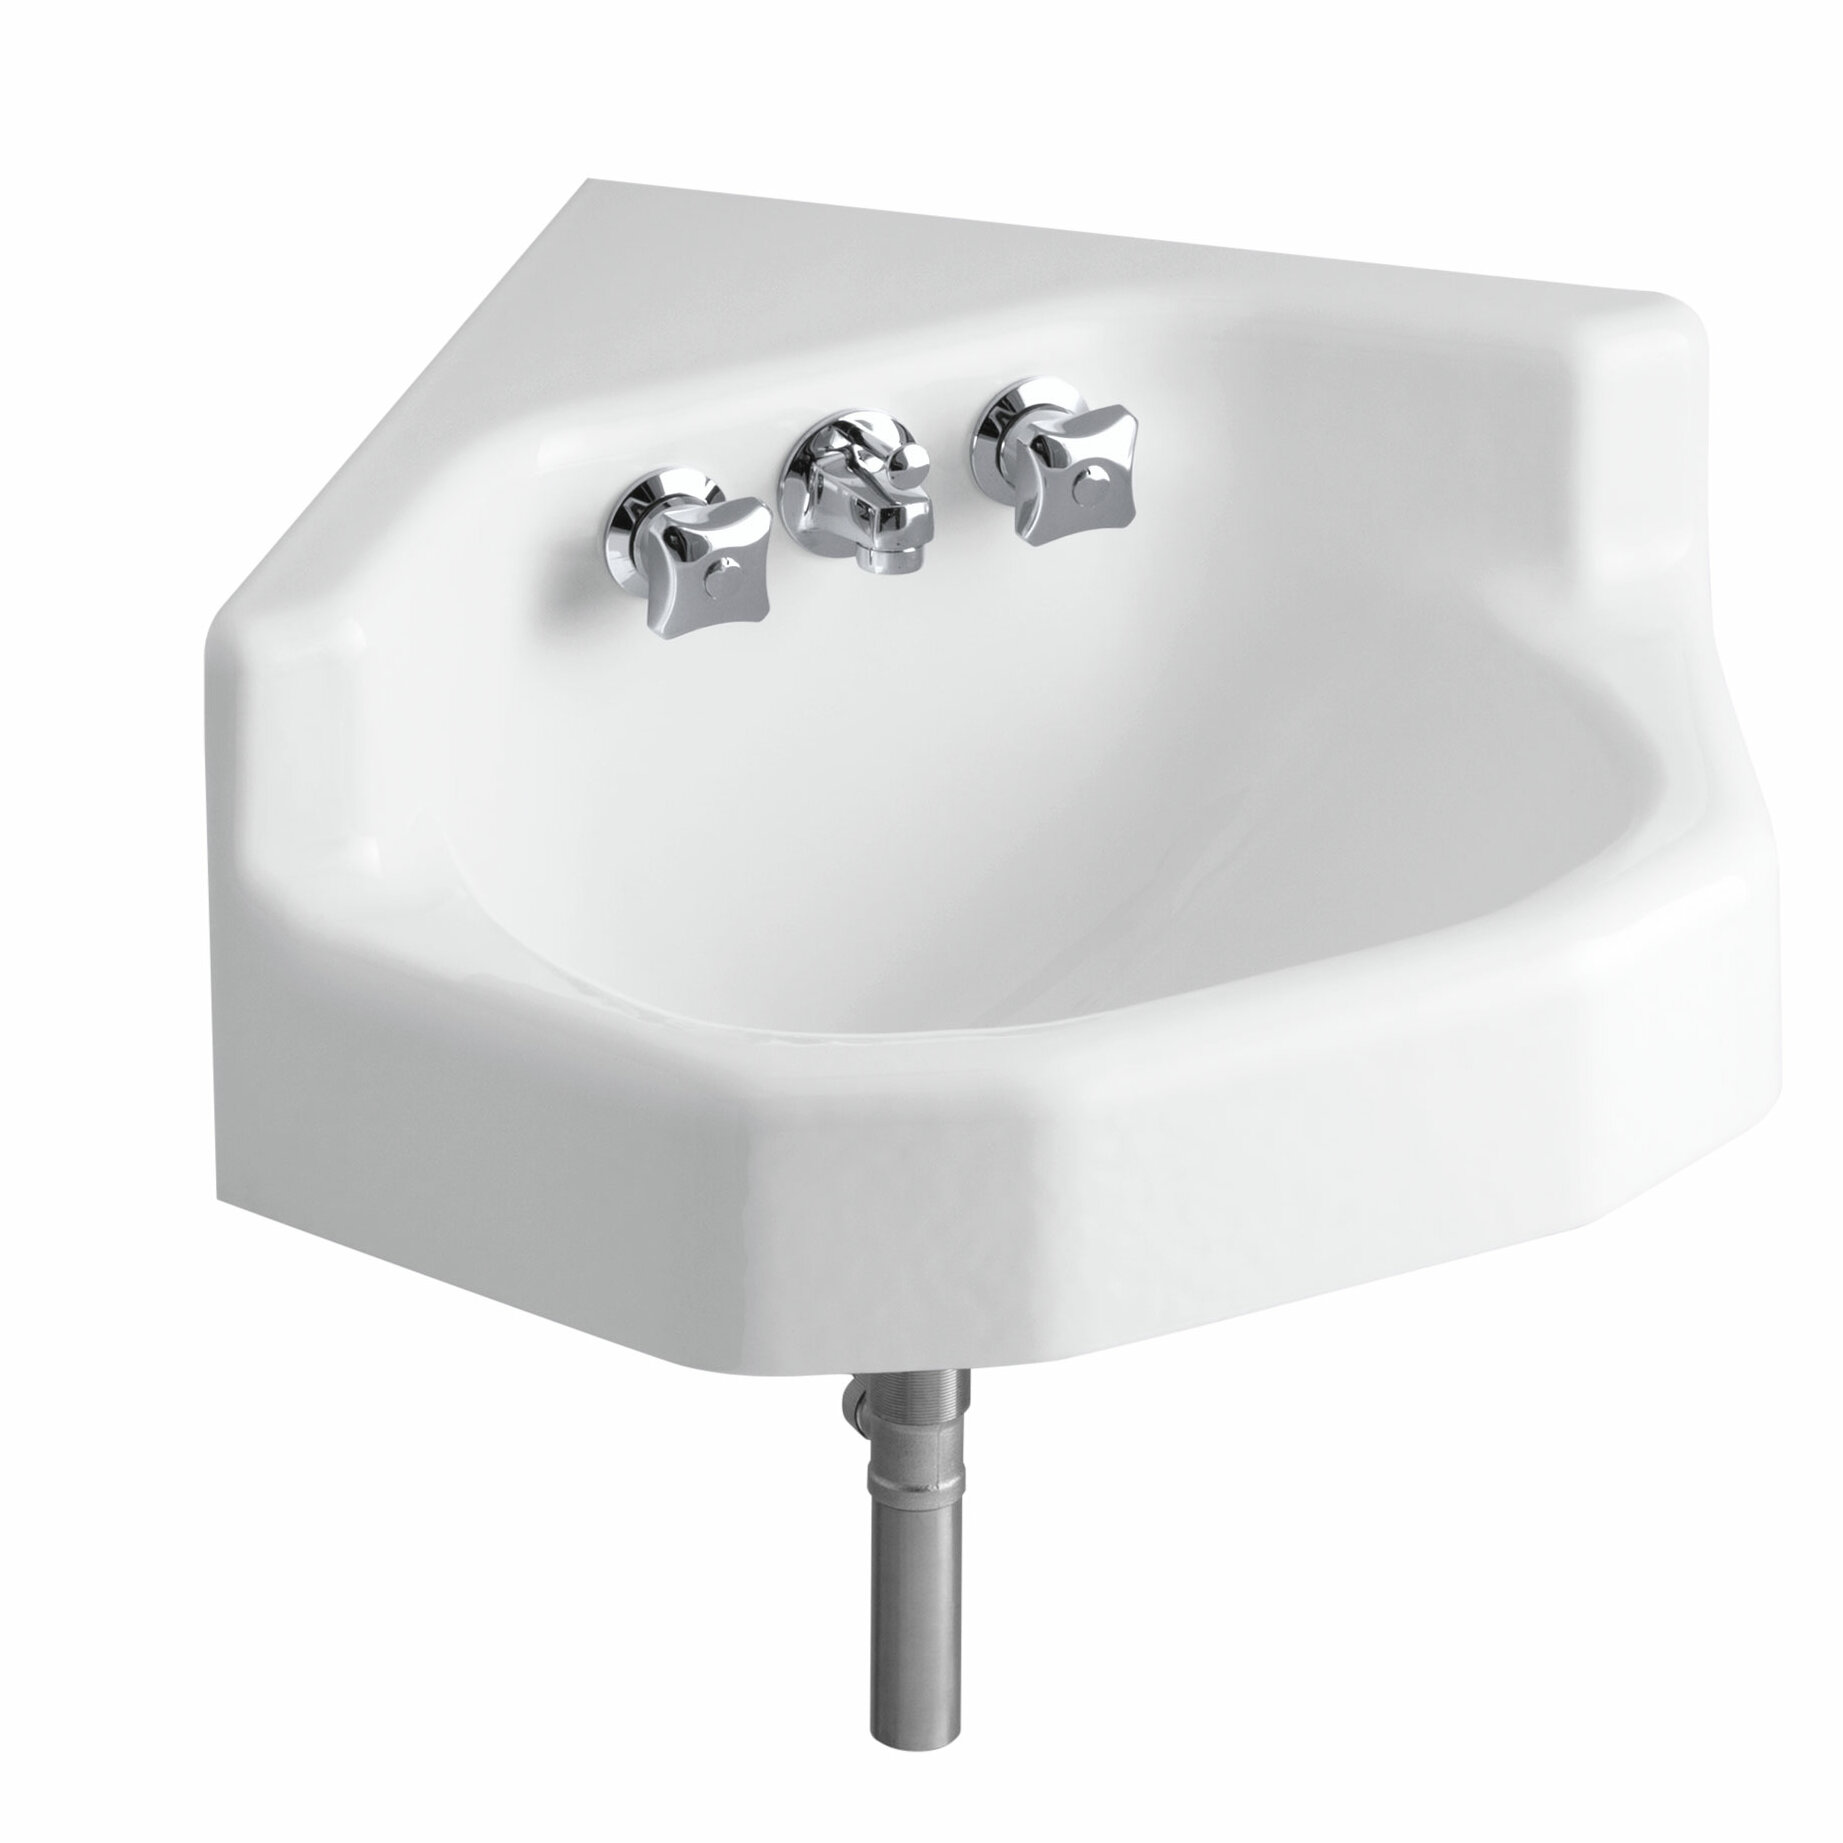 Marston Metal 23 Corner Bathroom Sink With Faucet And Overflow